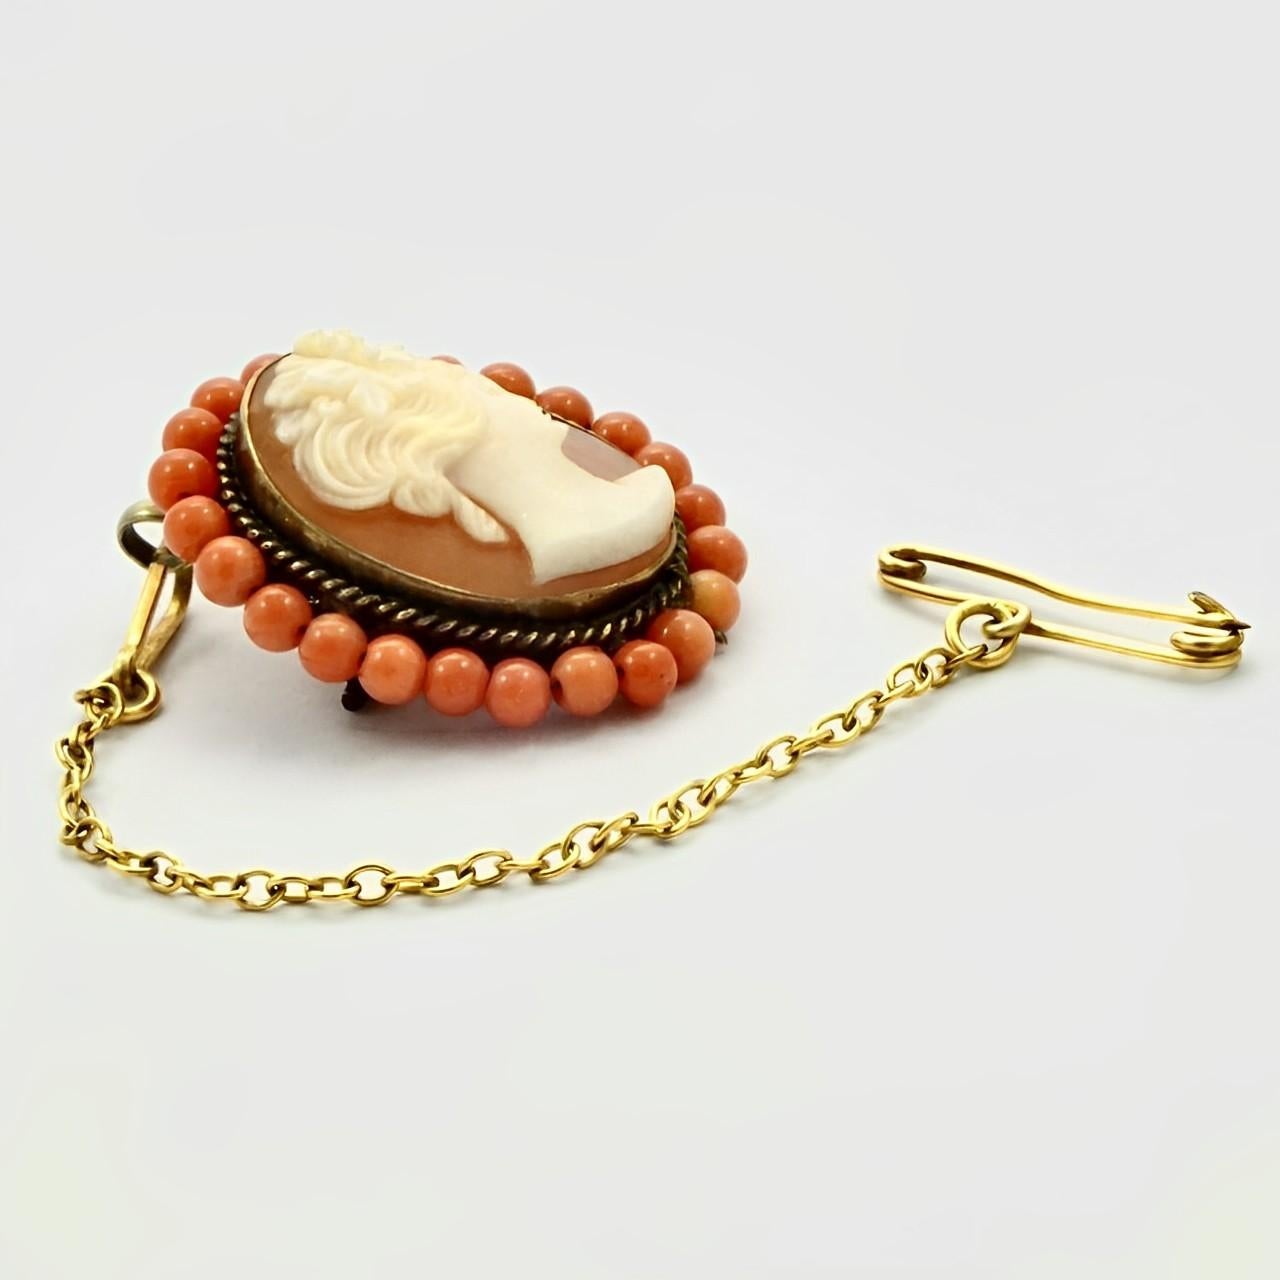 Women's or Men's Antique Gold Plated Shell Cameo Brooch with Coral Bead Surround For Sale